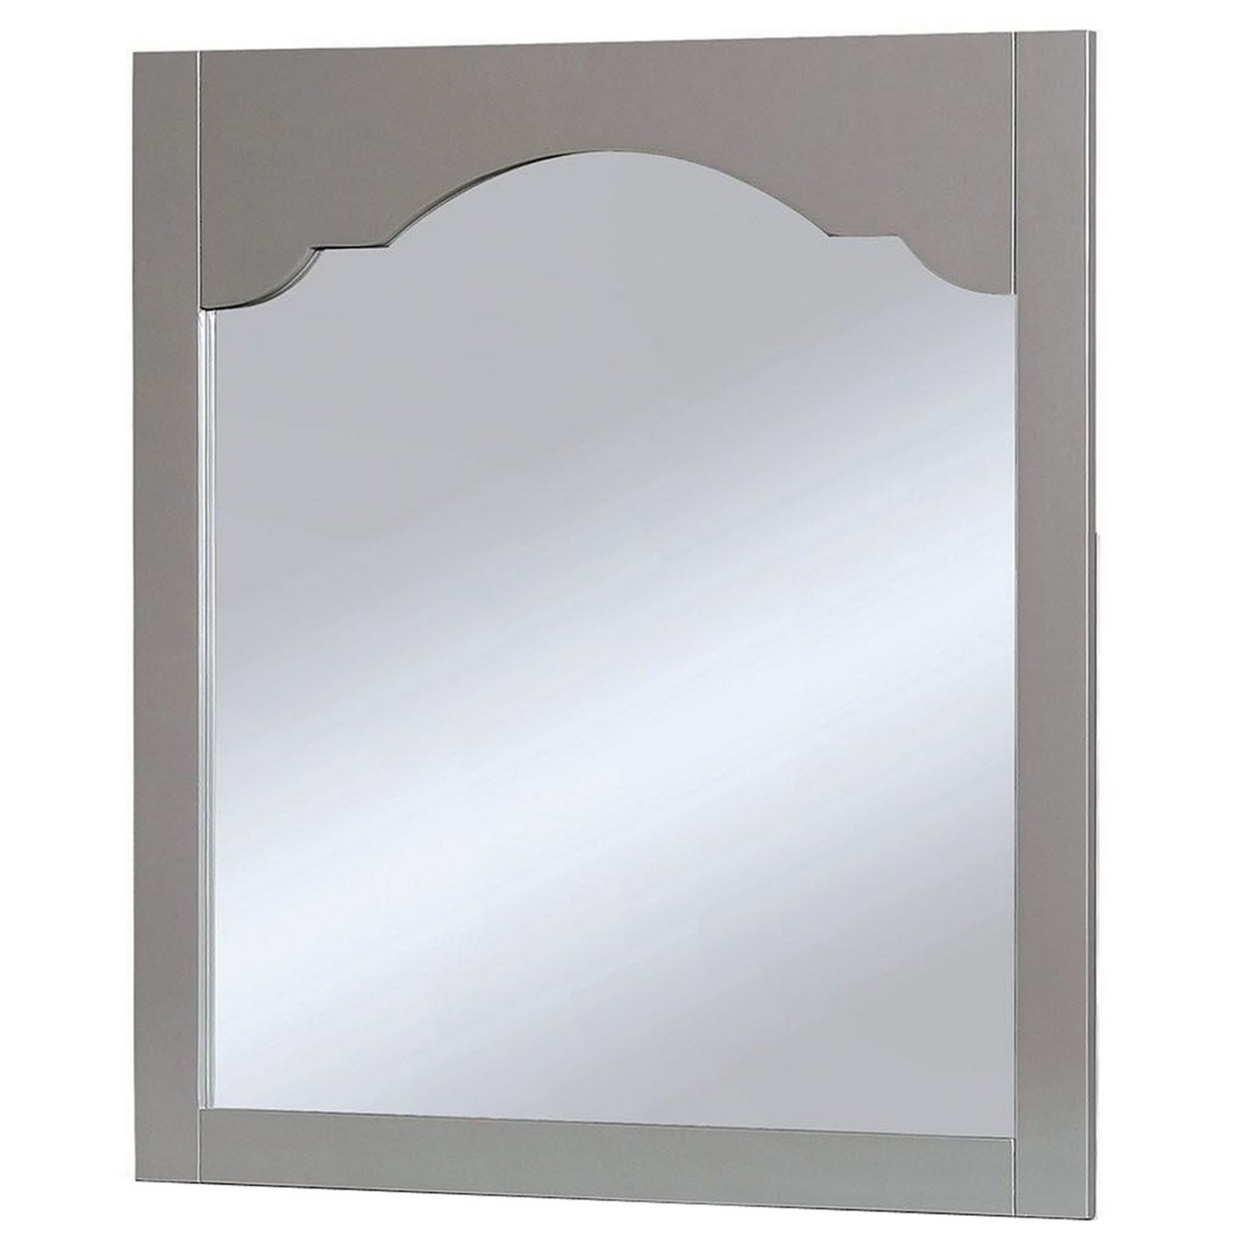 Wooden Encasing Mirror With Arched Design Top, Gray- Saltoro Sherpi